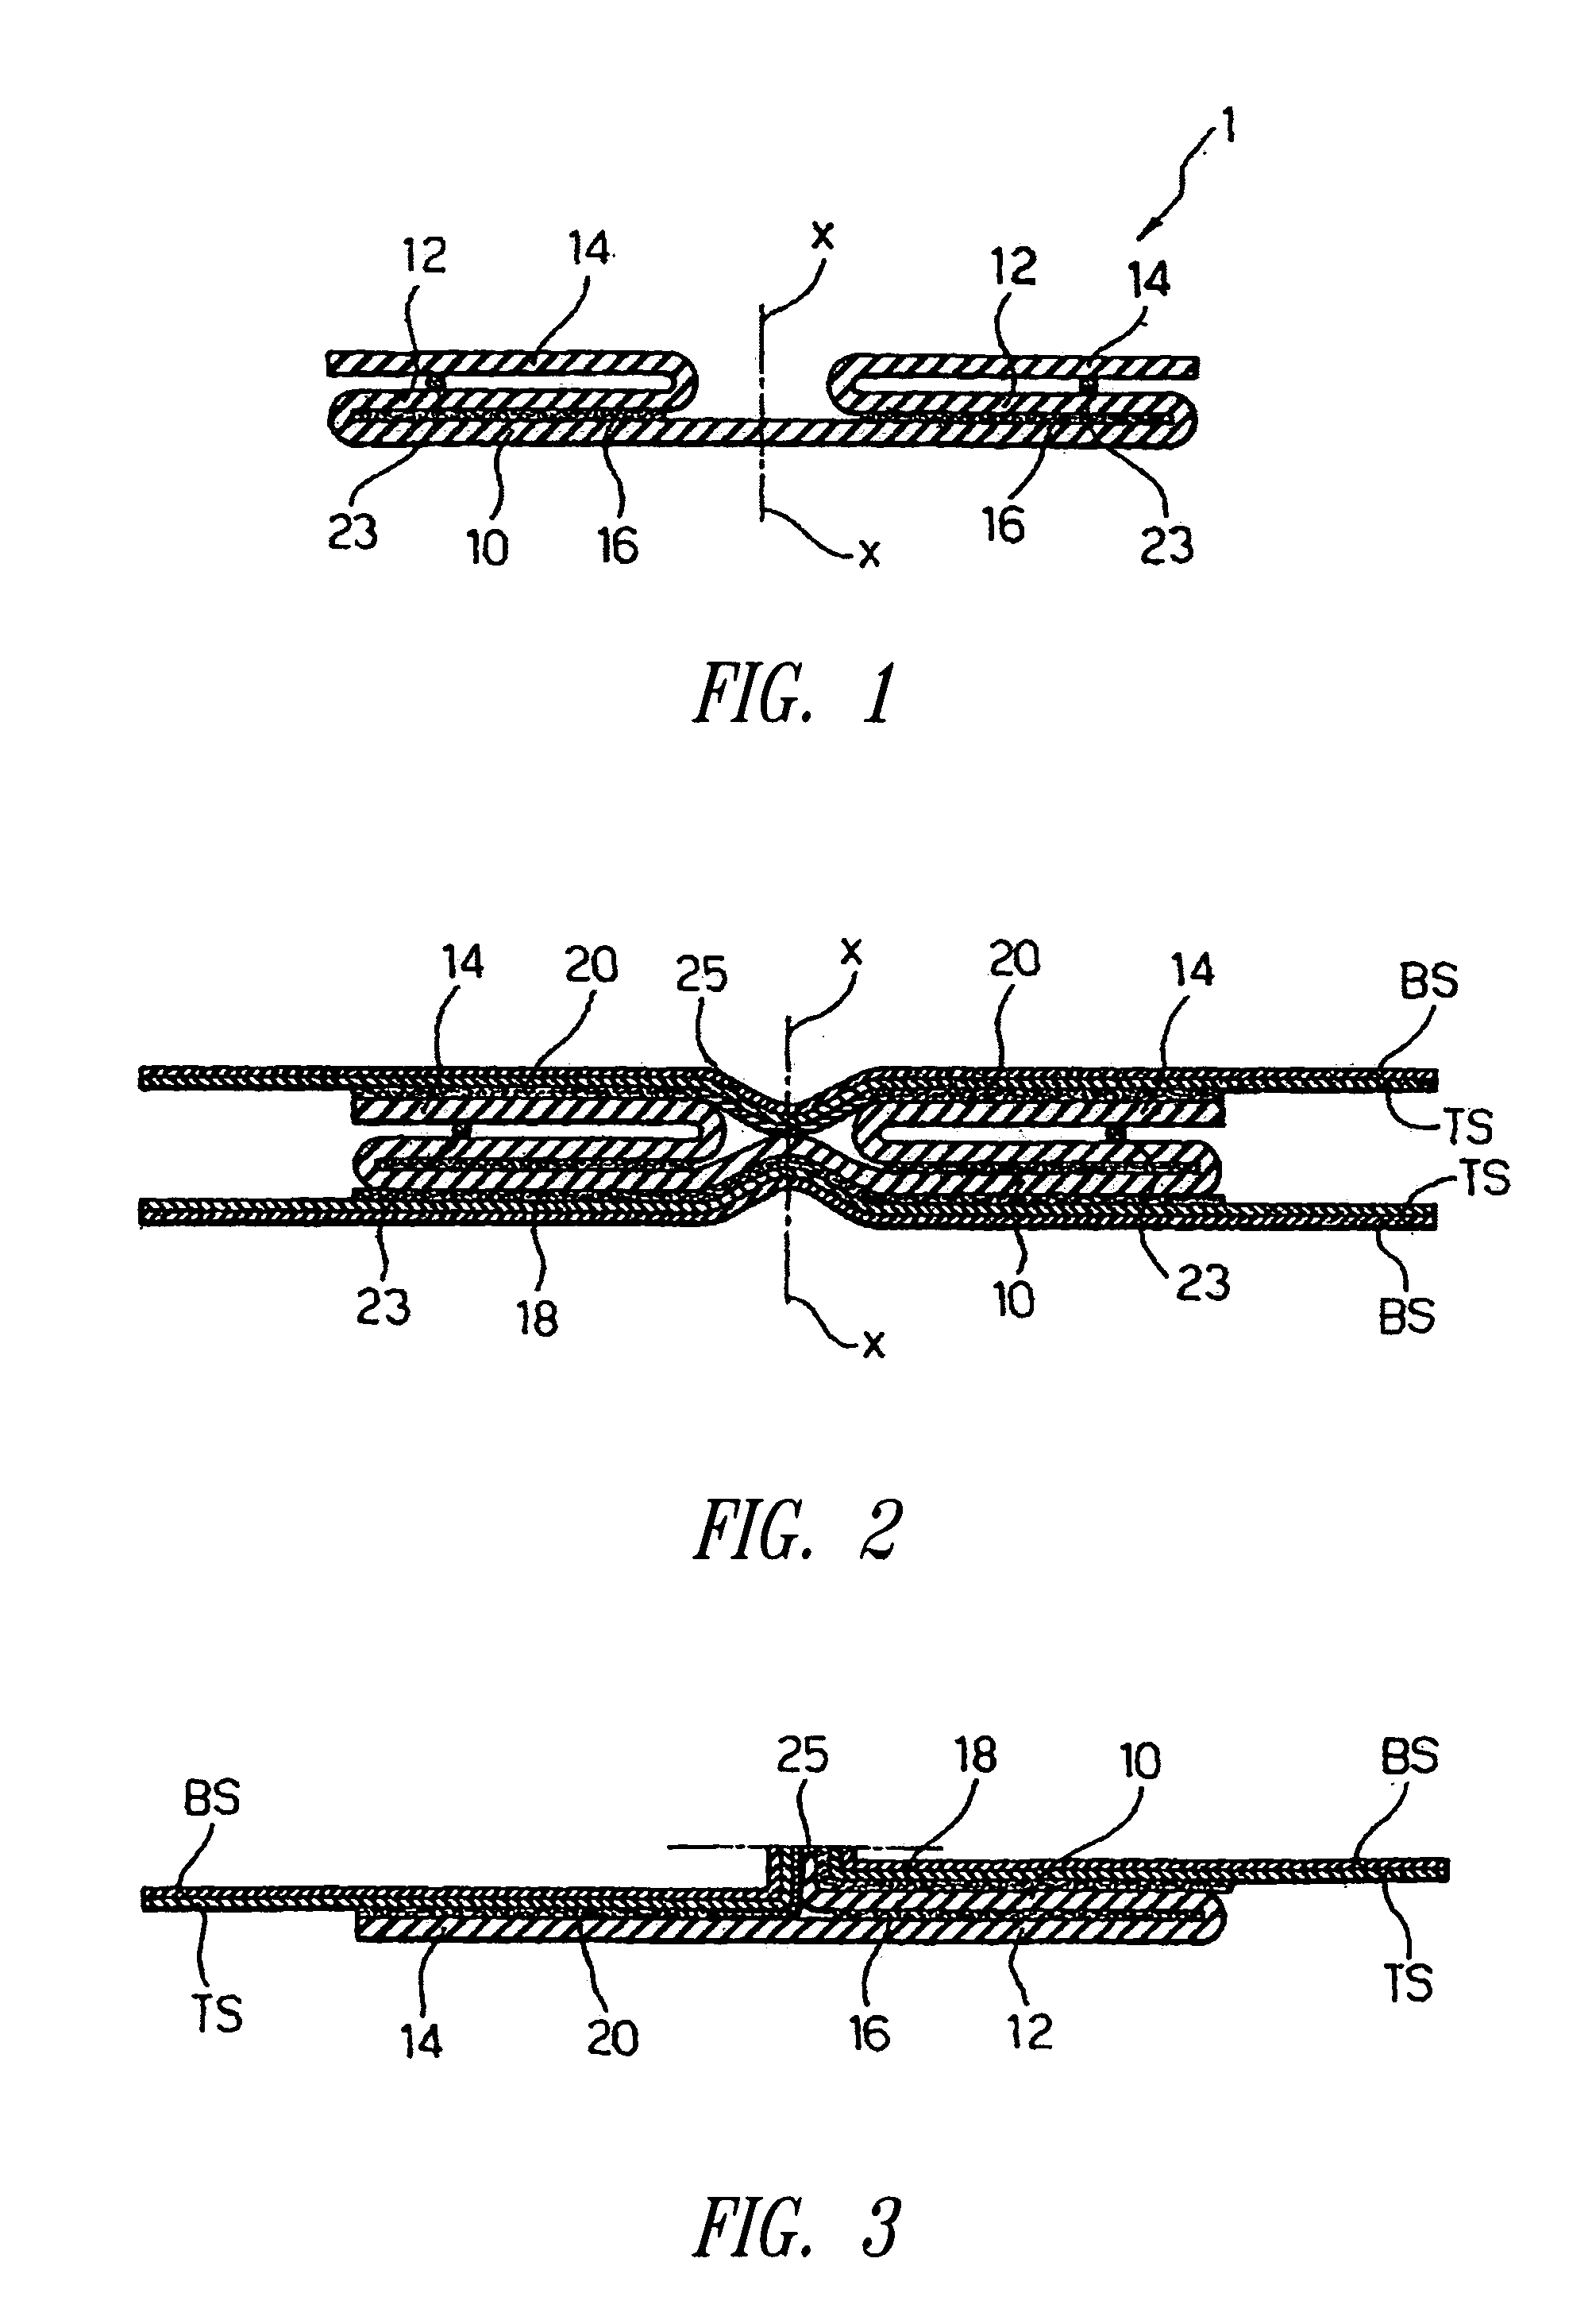 Closure element for absorbent sanitary products, manufacturing process, process of use, and product thus obtained